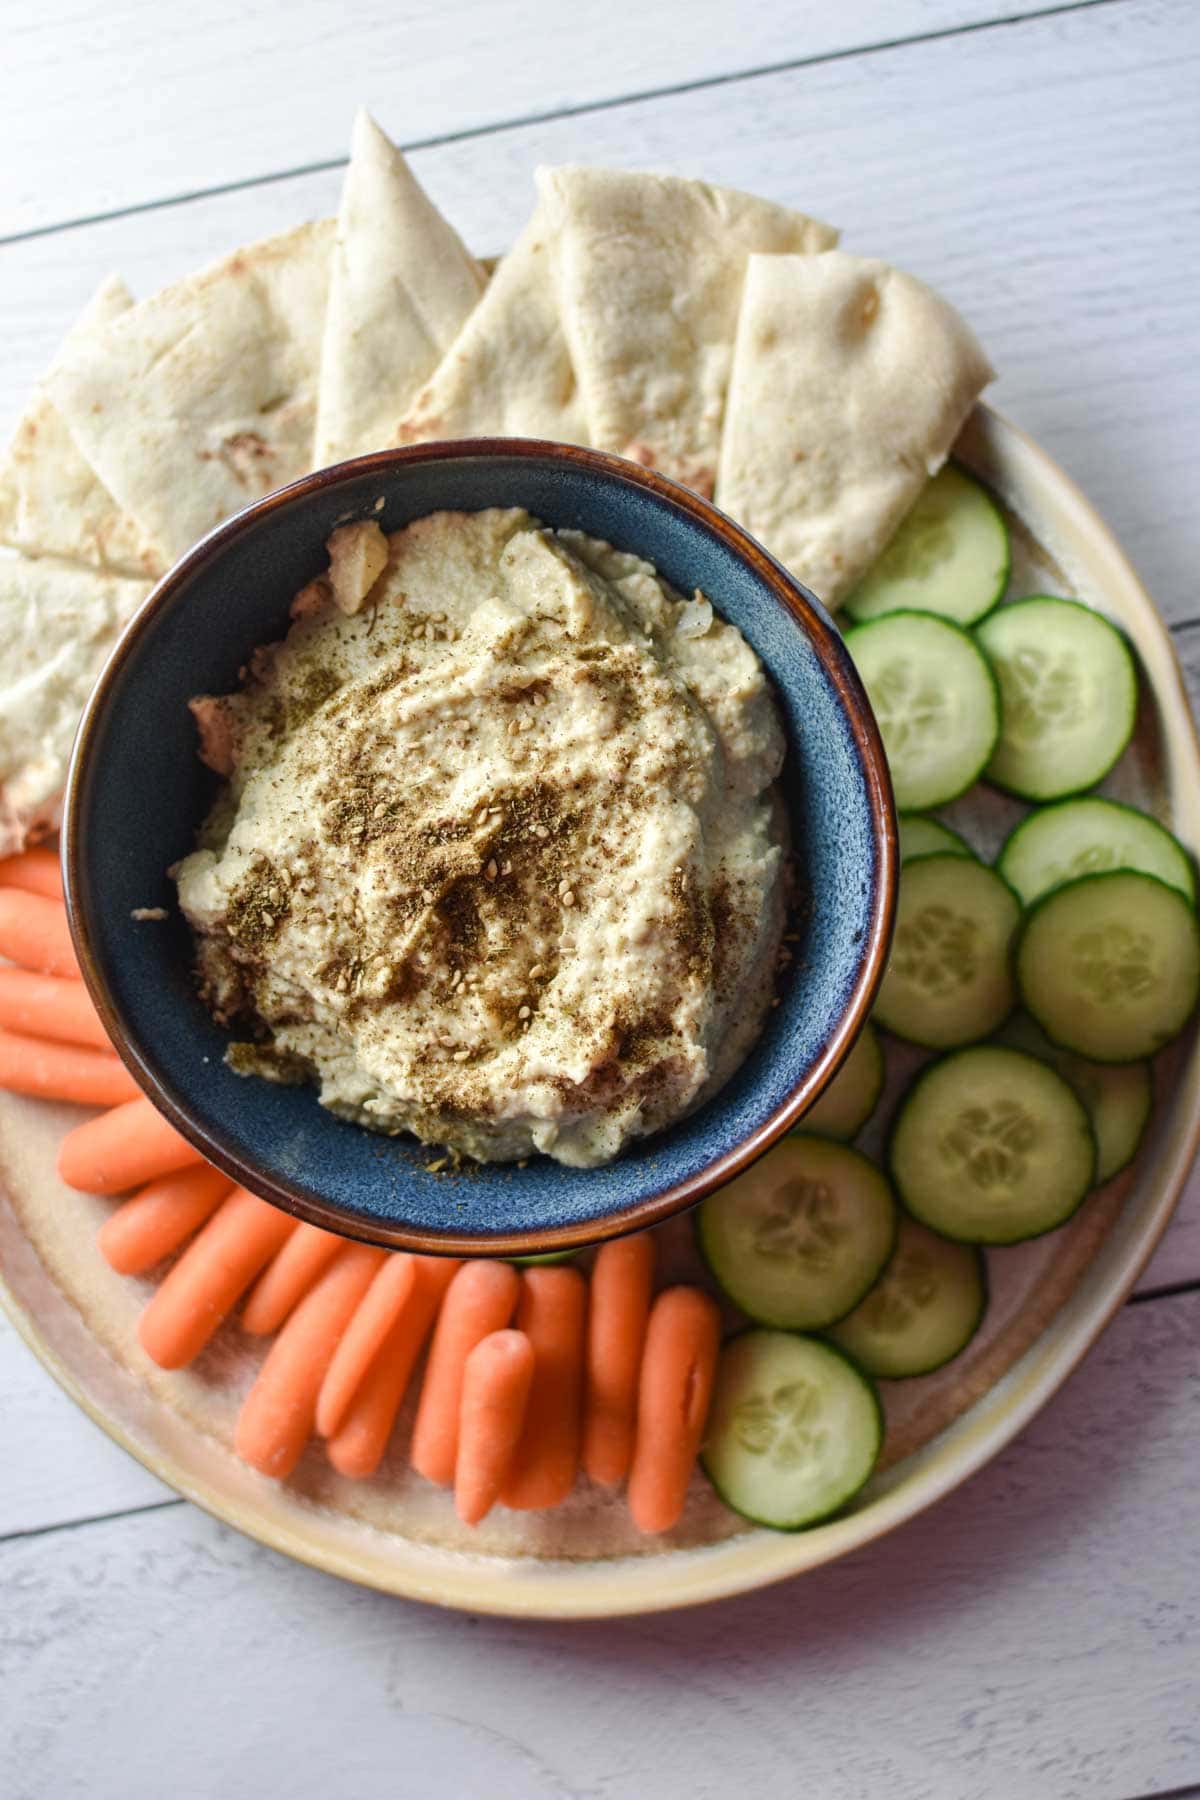 Artichoke hummus on a platter with appetizers.